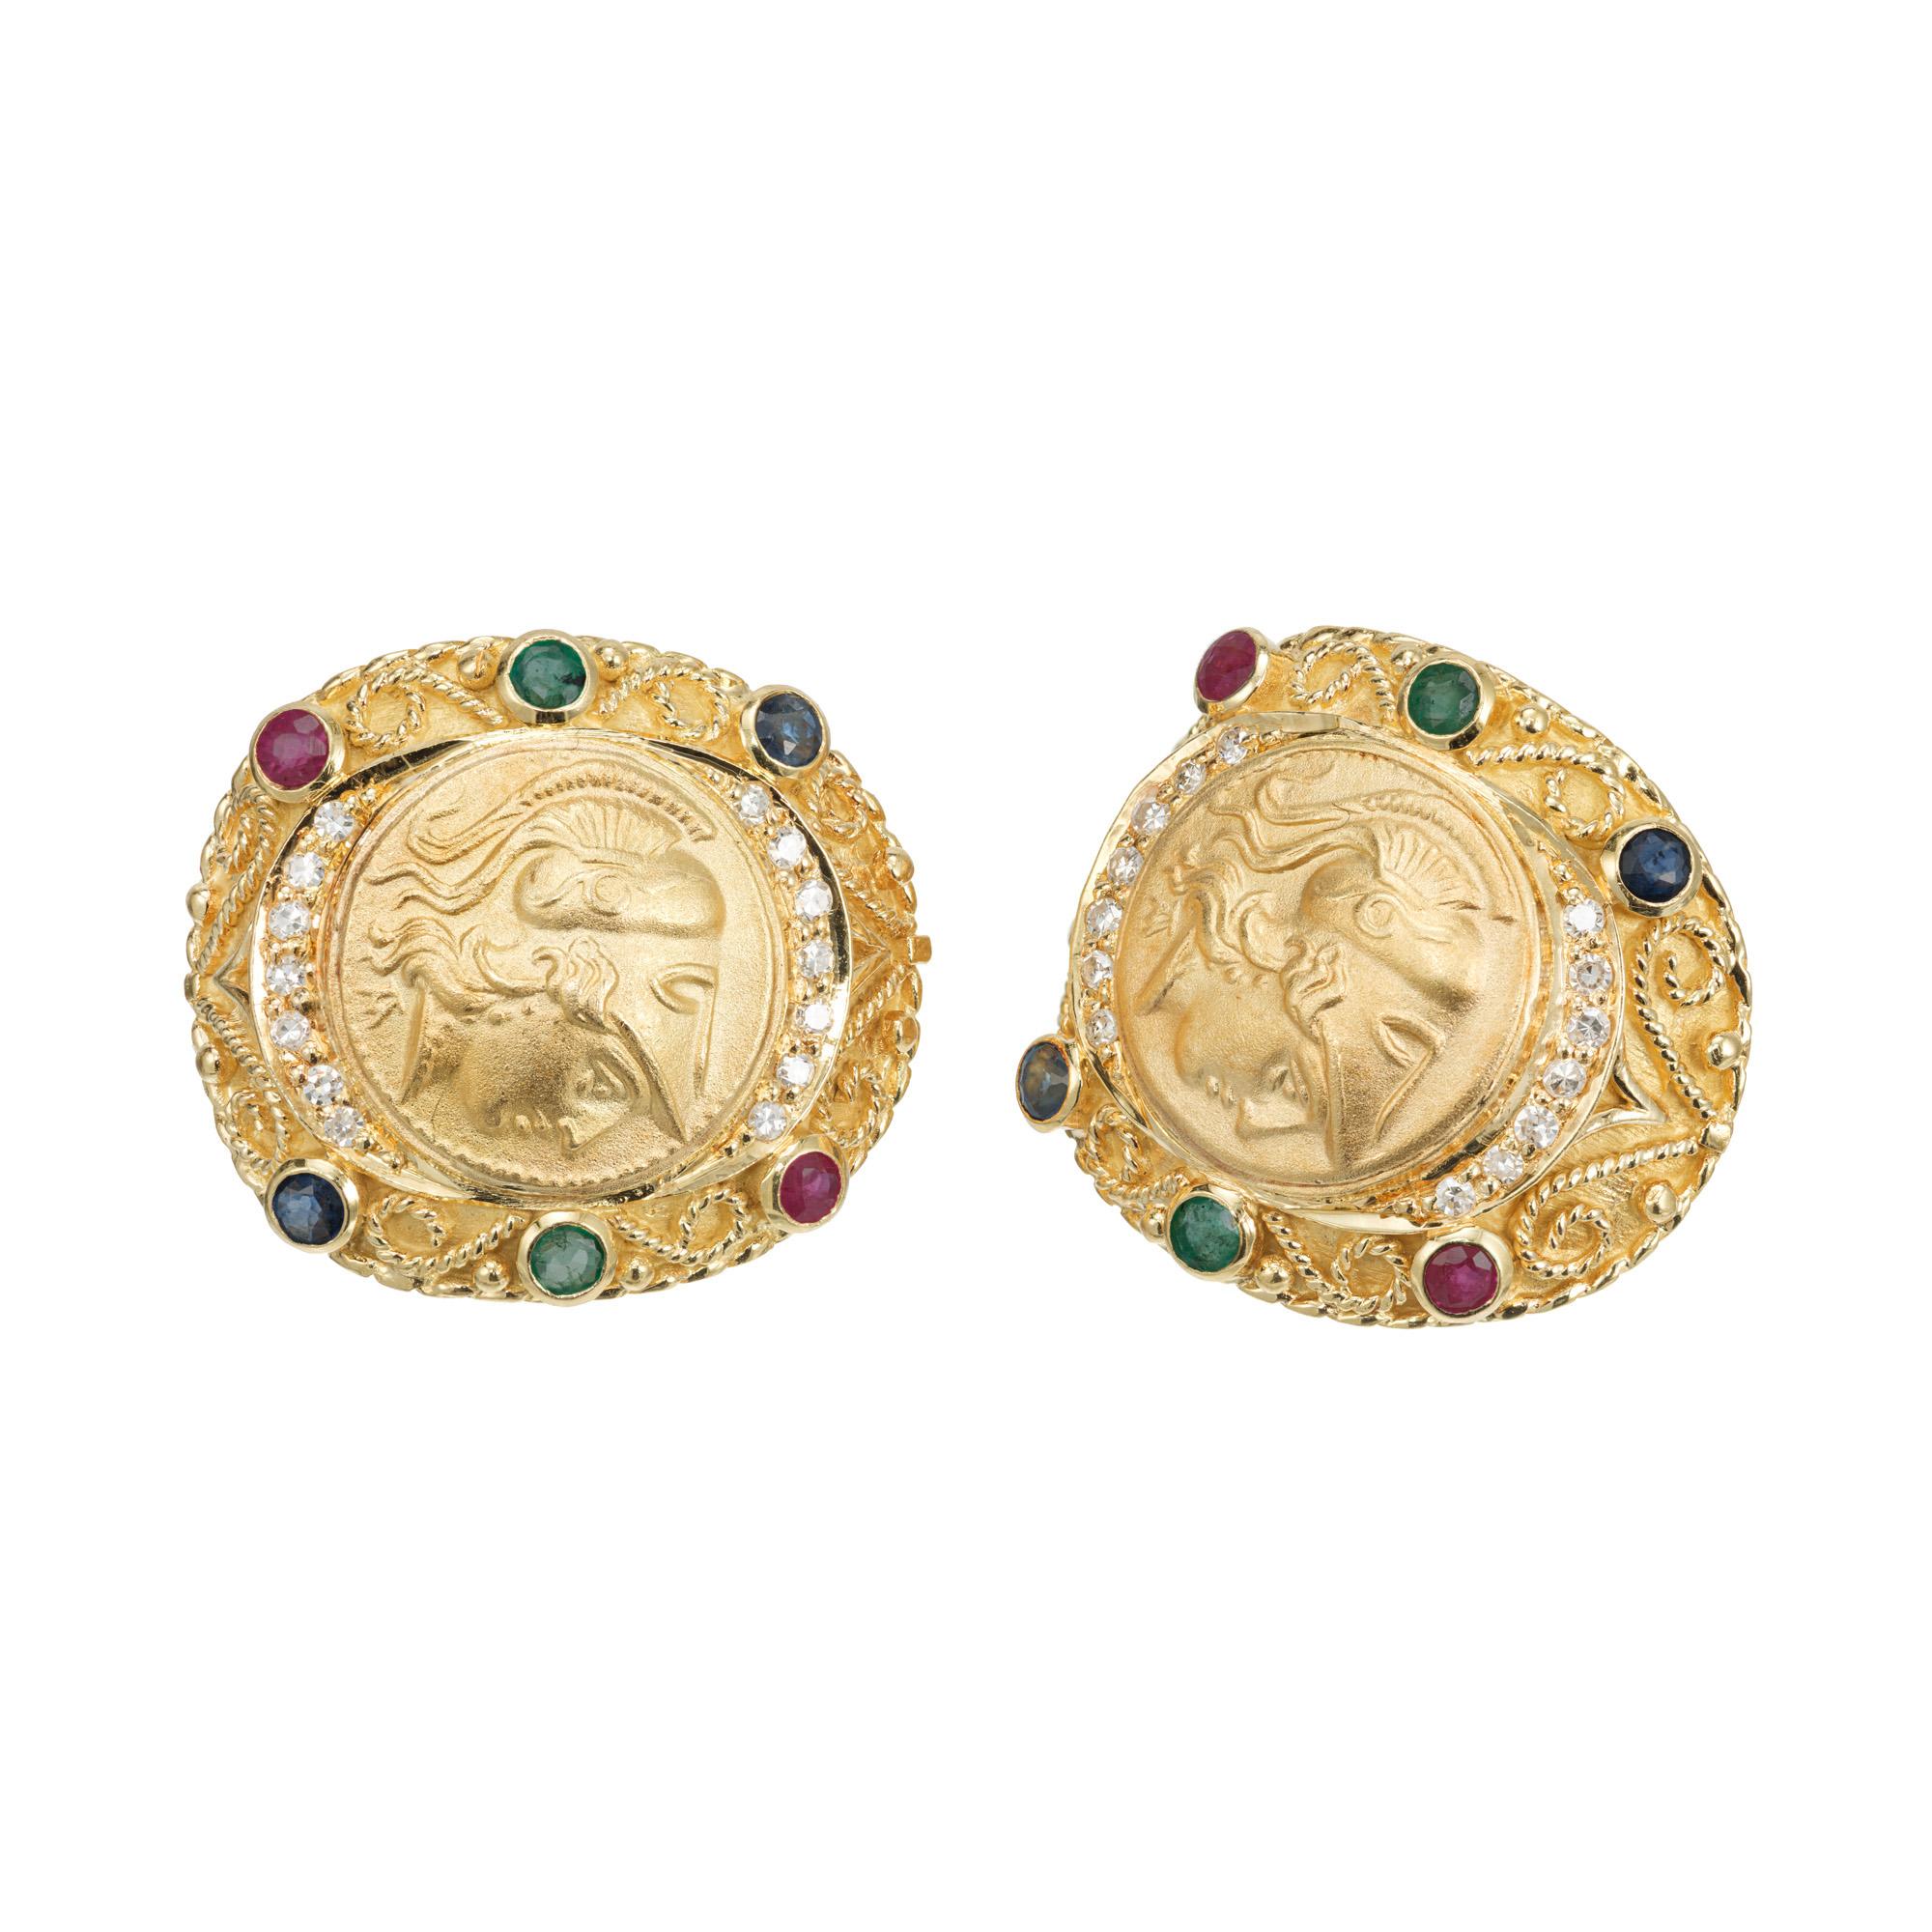 Vintage 1980's multi-stone lever back earrings. Both of these Byzantine style 18k yellow gold clip post earrings earrings consist 2 bezel set round rubies, 2 bezel set round emeralds and 2 bezel set round sapphires. Ornately detailed with both